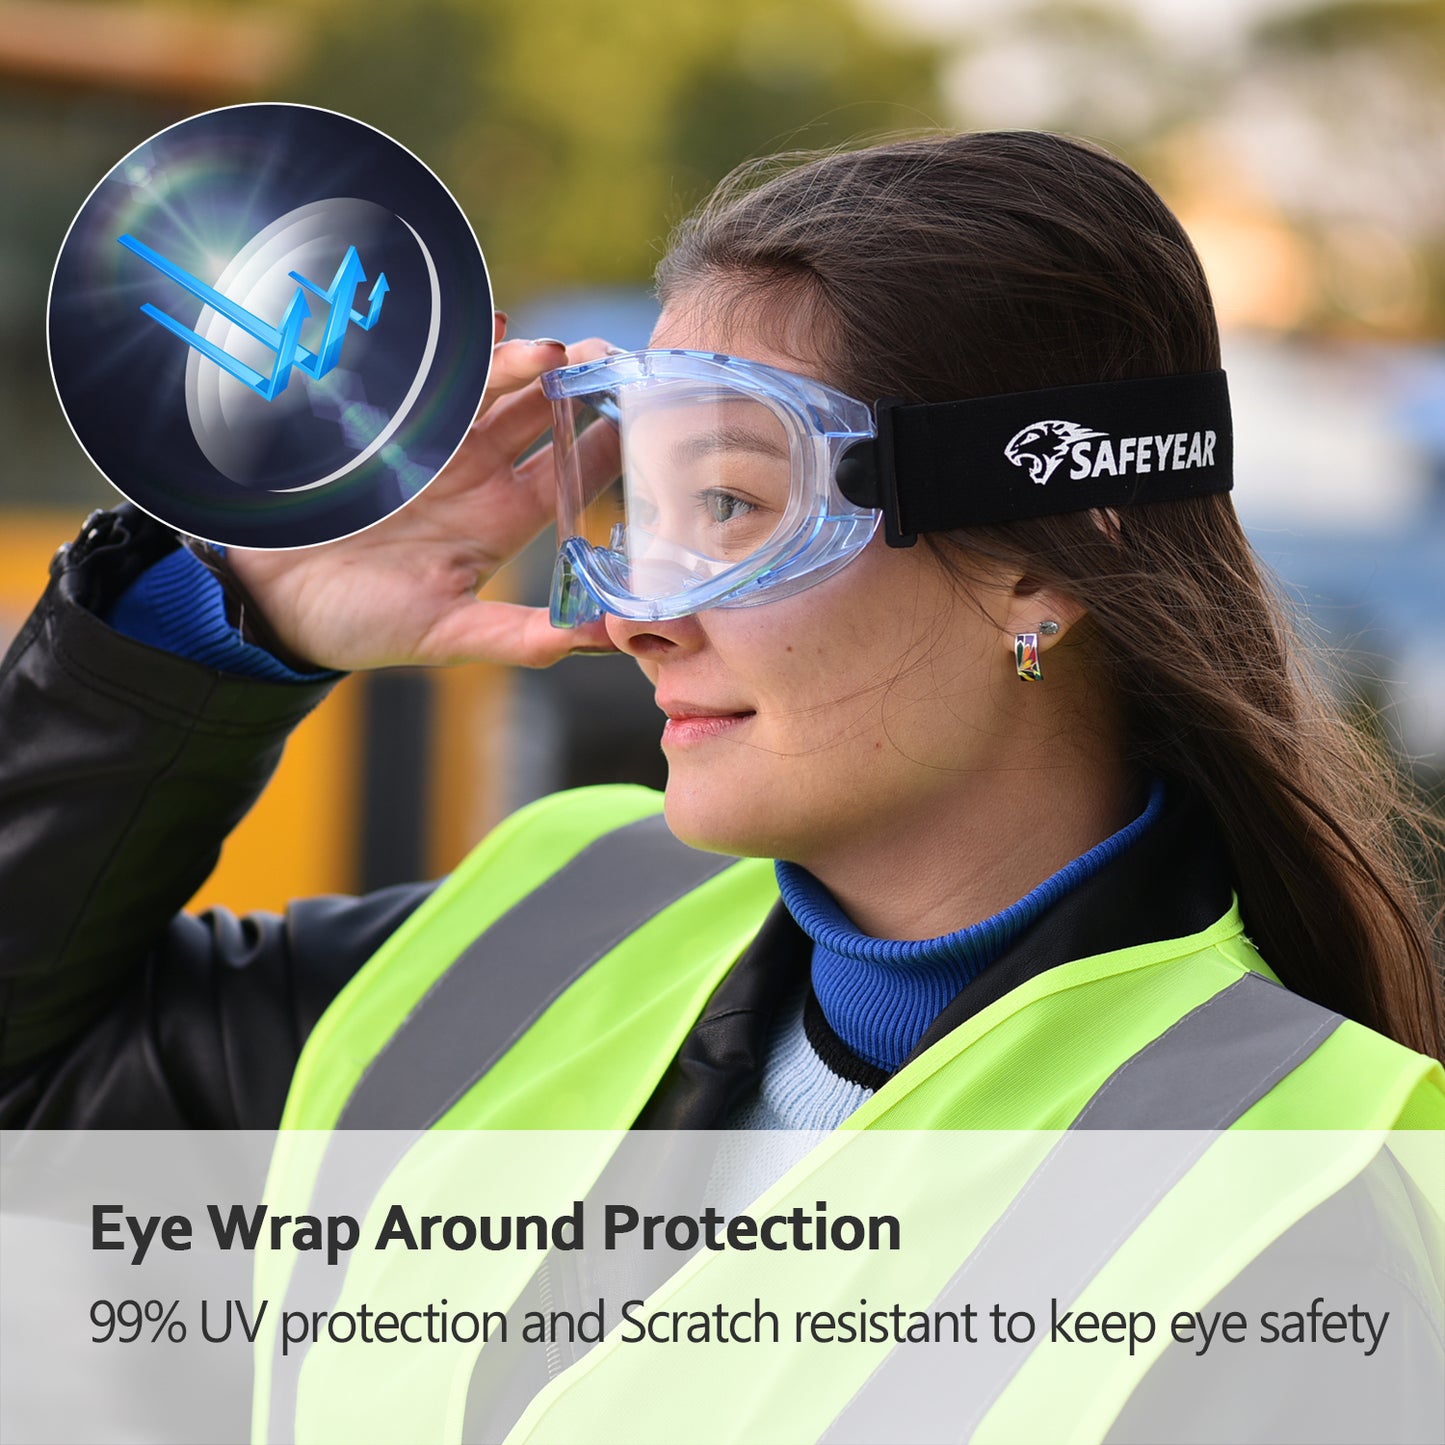 SAFEYEAR Anti Fog Safety Goggles Blue【ANSI Z87 Approved】 HD Scratch Resistant Safety Glasses for Men and Women, VU Protection Over Glasses Work Goggles